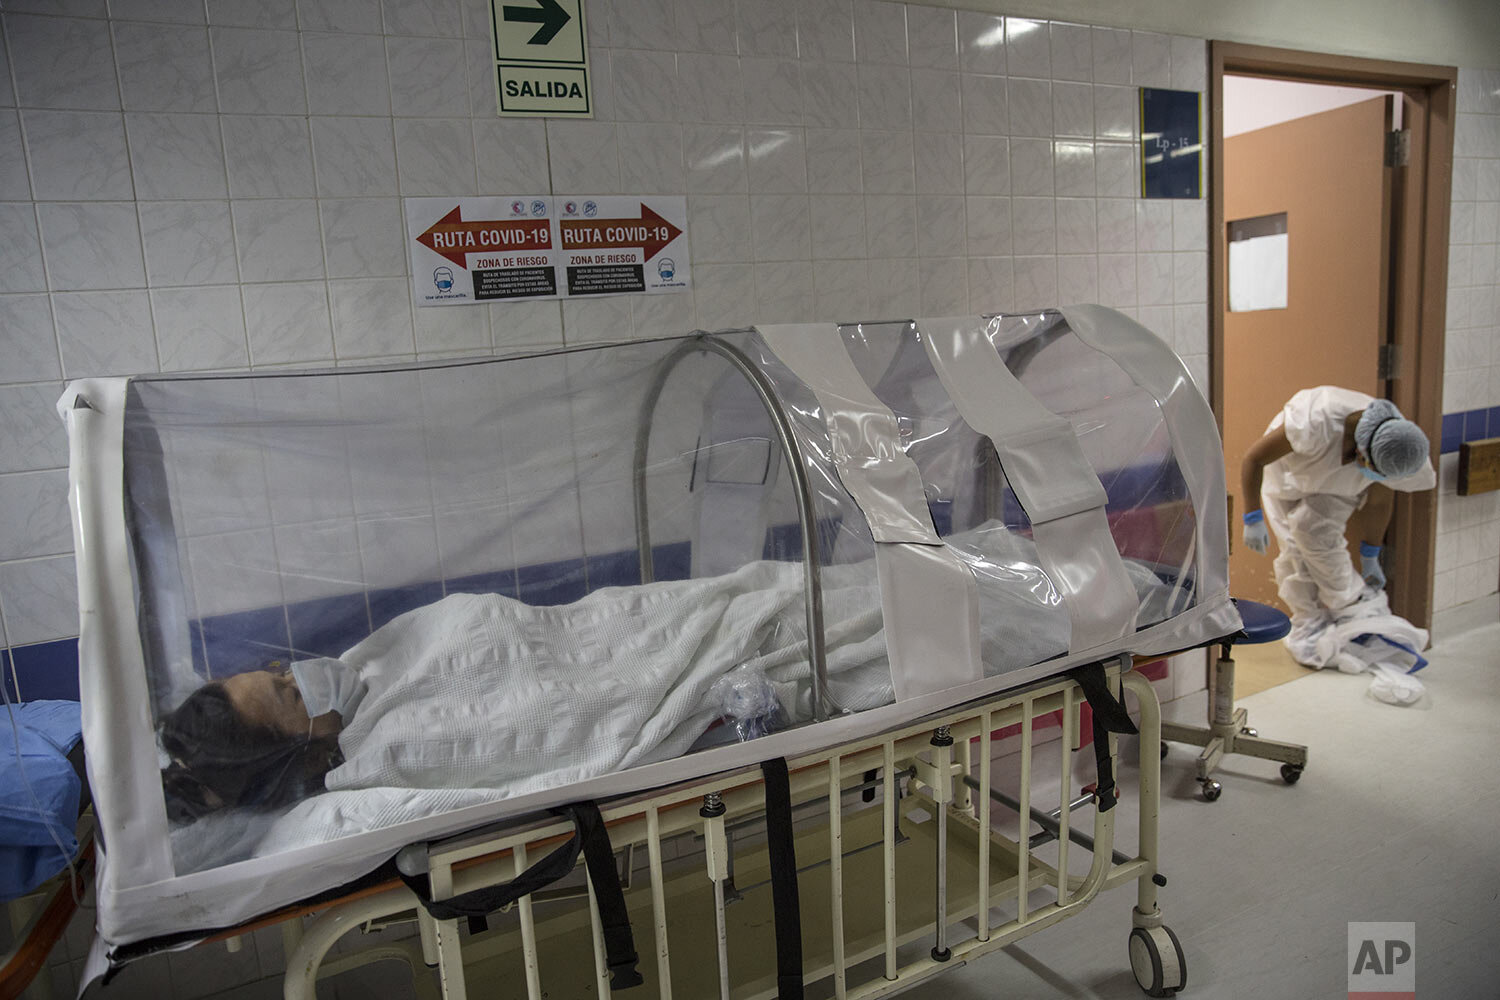  Maria Alvarez rests in a coronavirus isolation pod after giving birth at the National Perinatal and Maternal Institute in Lima, Peru, Wednesday, July 29, 2020. (AP Photo/Rodrigo Abd) 